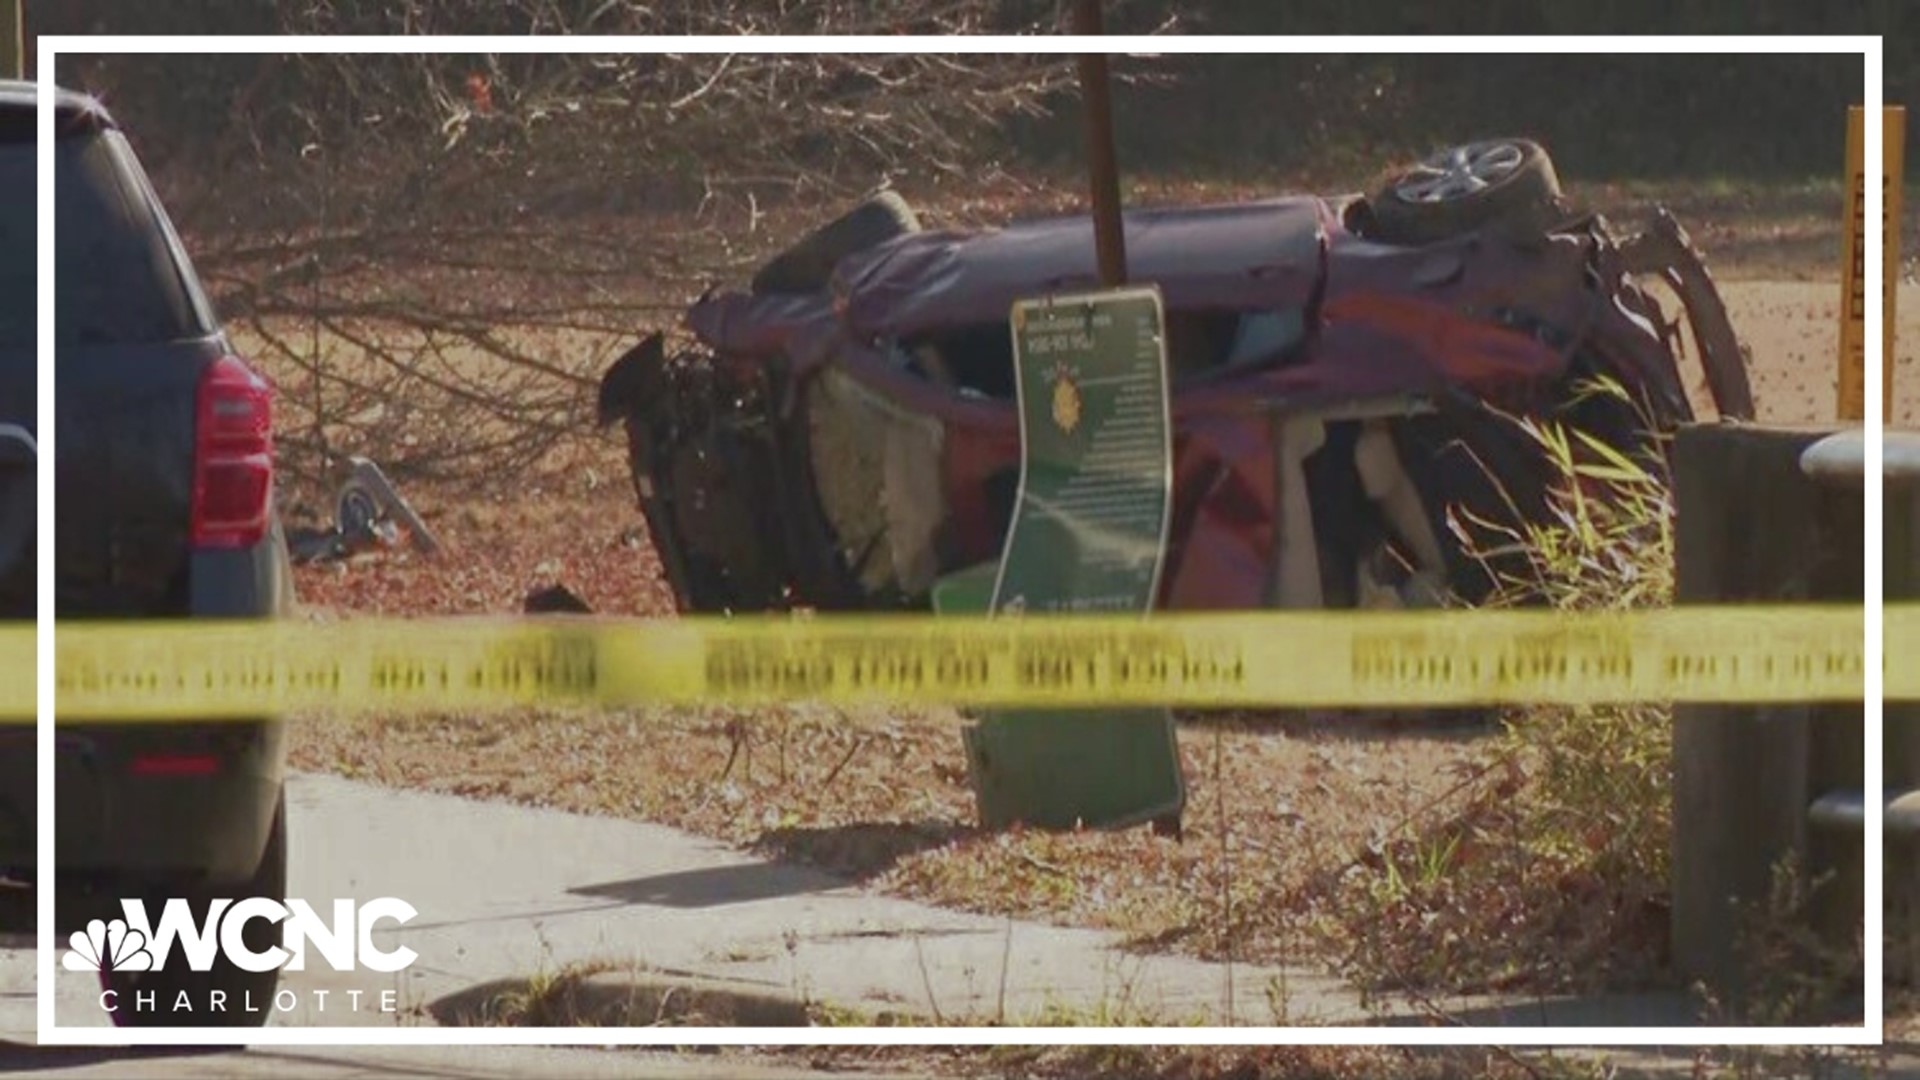 The 15-year-old was one of four Charlotte students seriously injured in a crash last week.